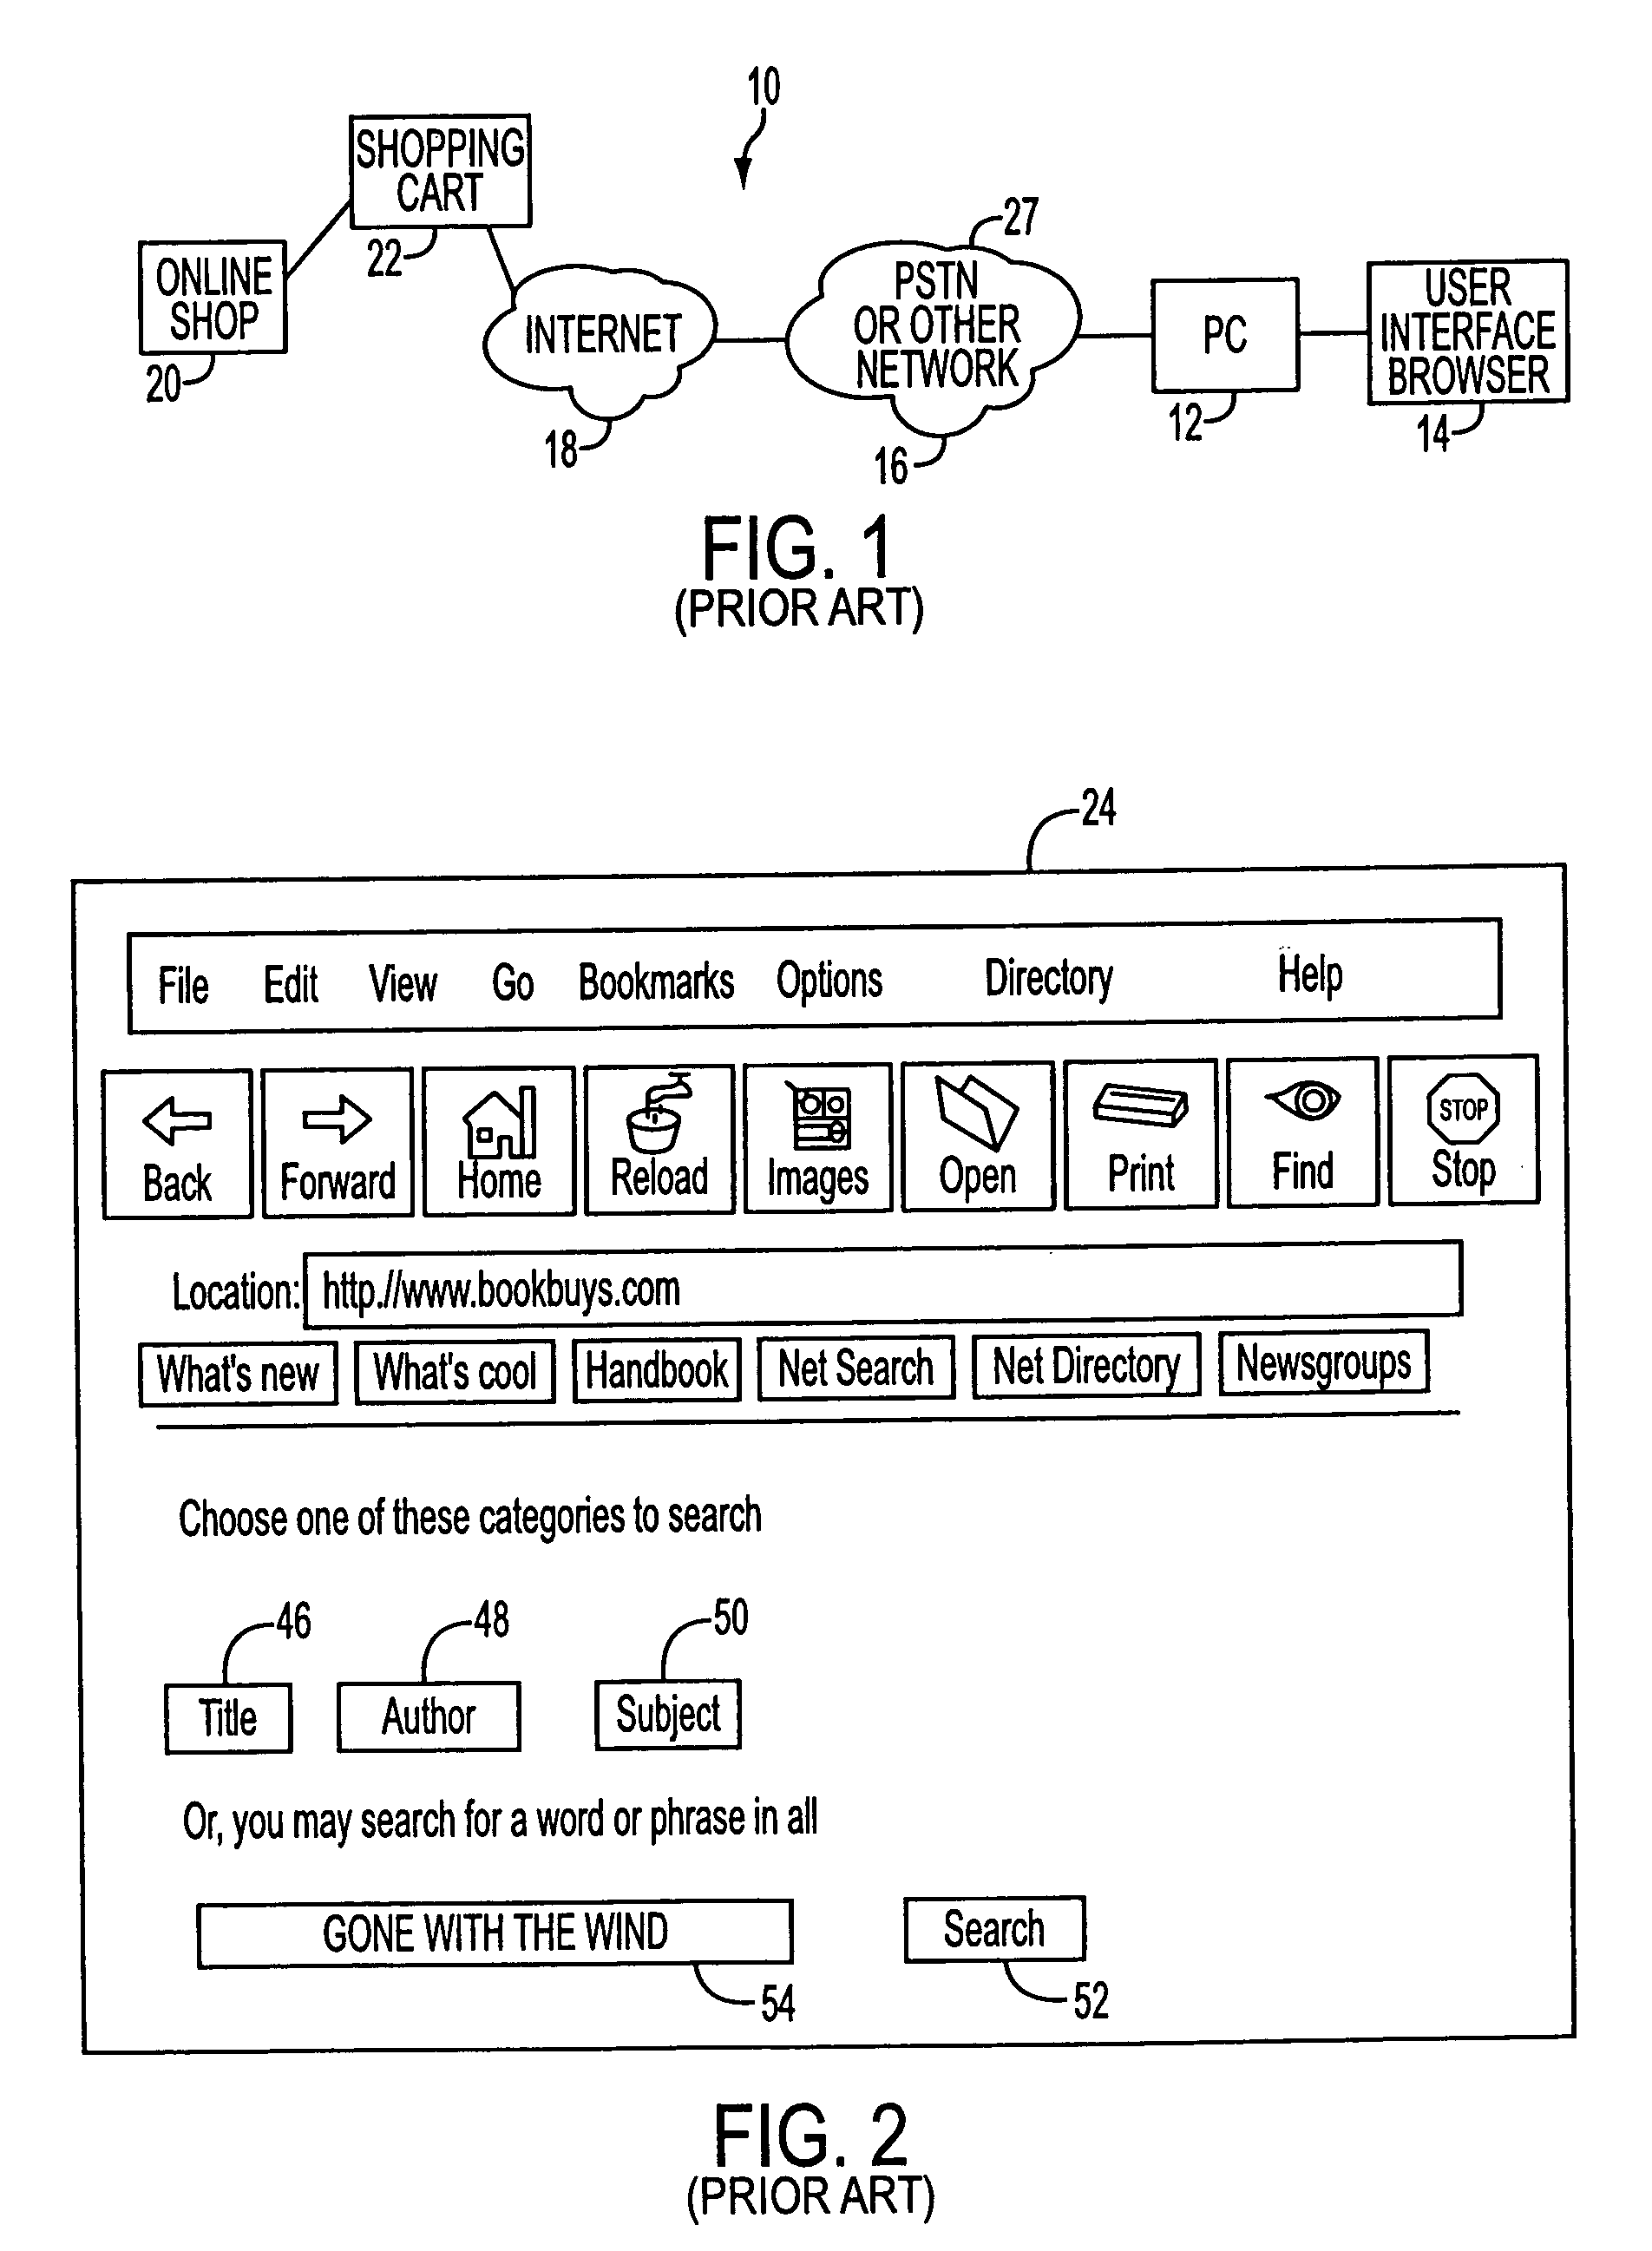 Telephony-data application interface apparatus and method for multi-modal access to data applications